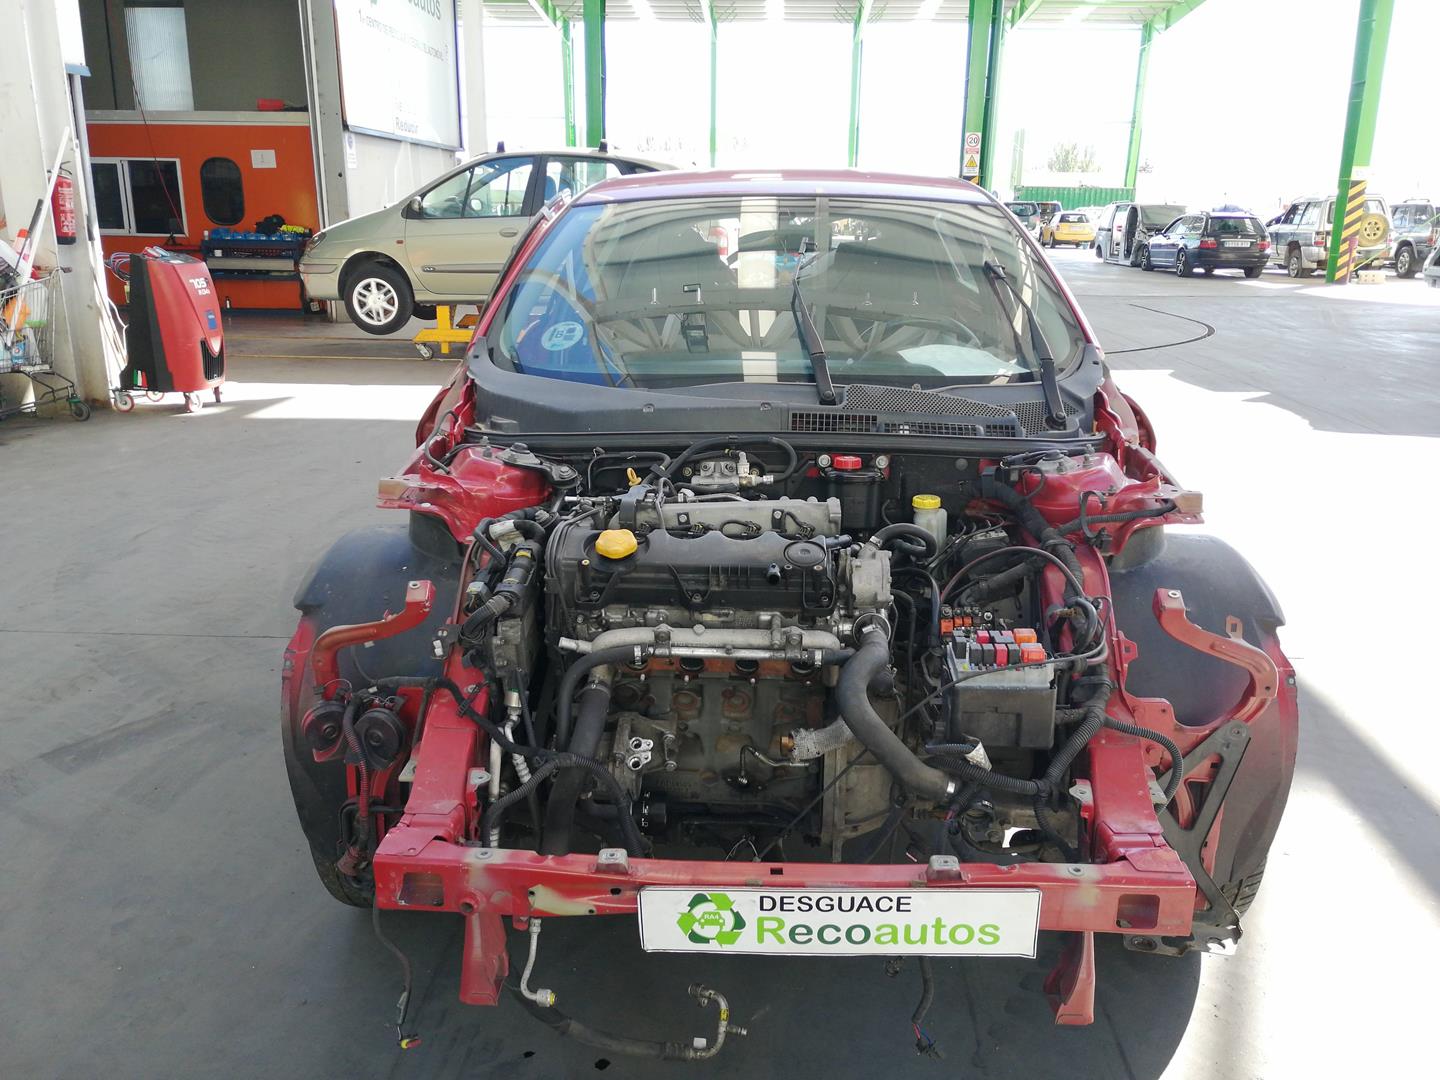 ALFA ROMEO 147 2 generation (2004-2010) Other Engine Compartment Parts 55183840, 55183840 21728708